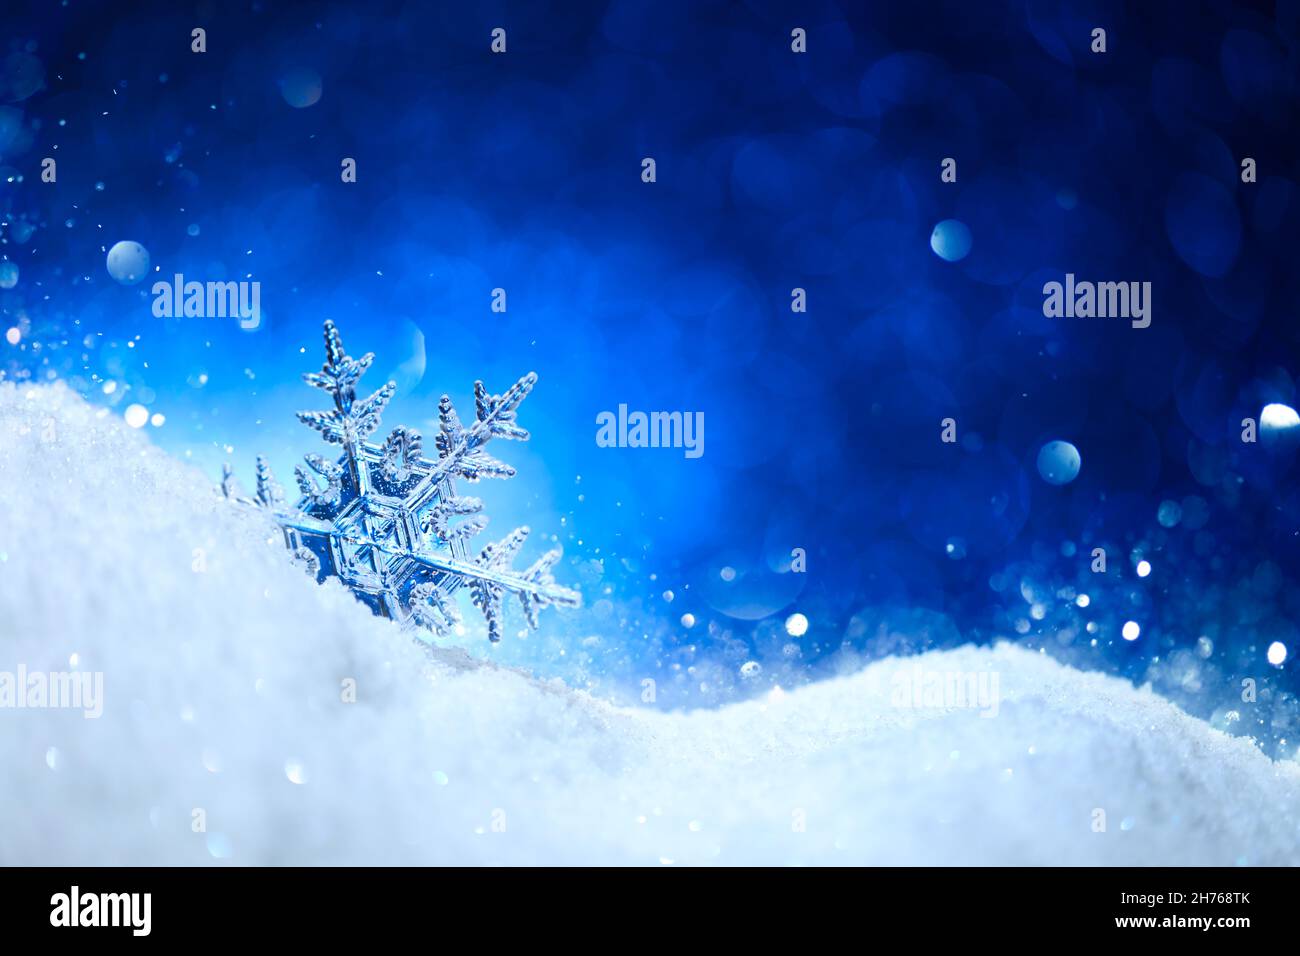 Snowflake on glittering white snow with sparkling blue background. Stock Photo